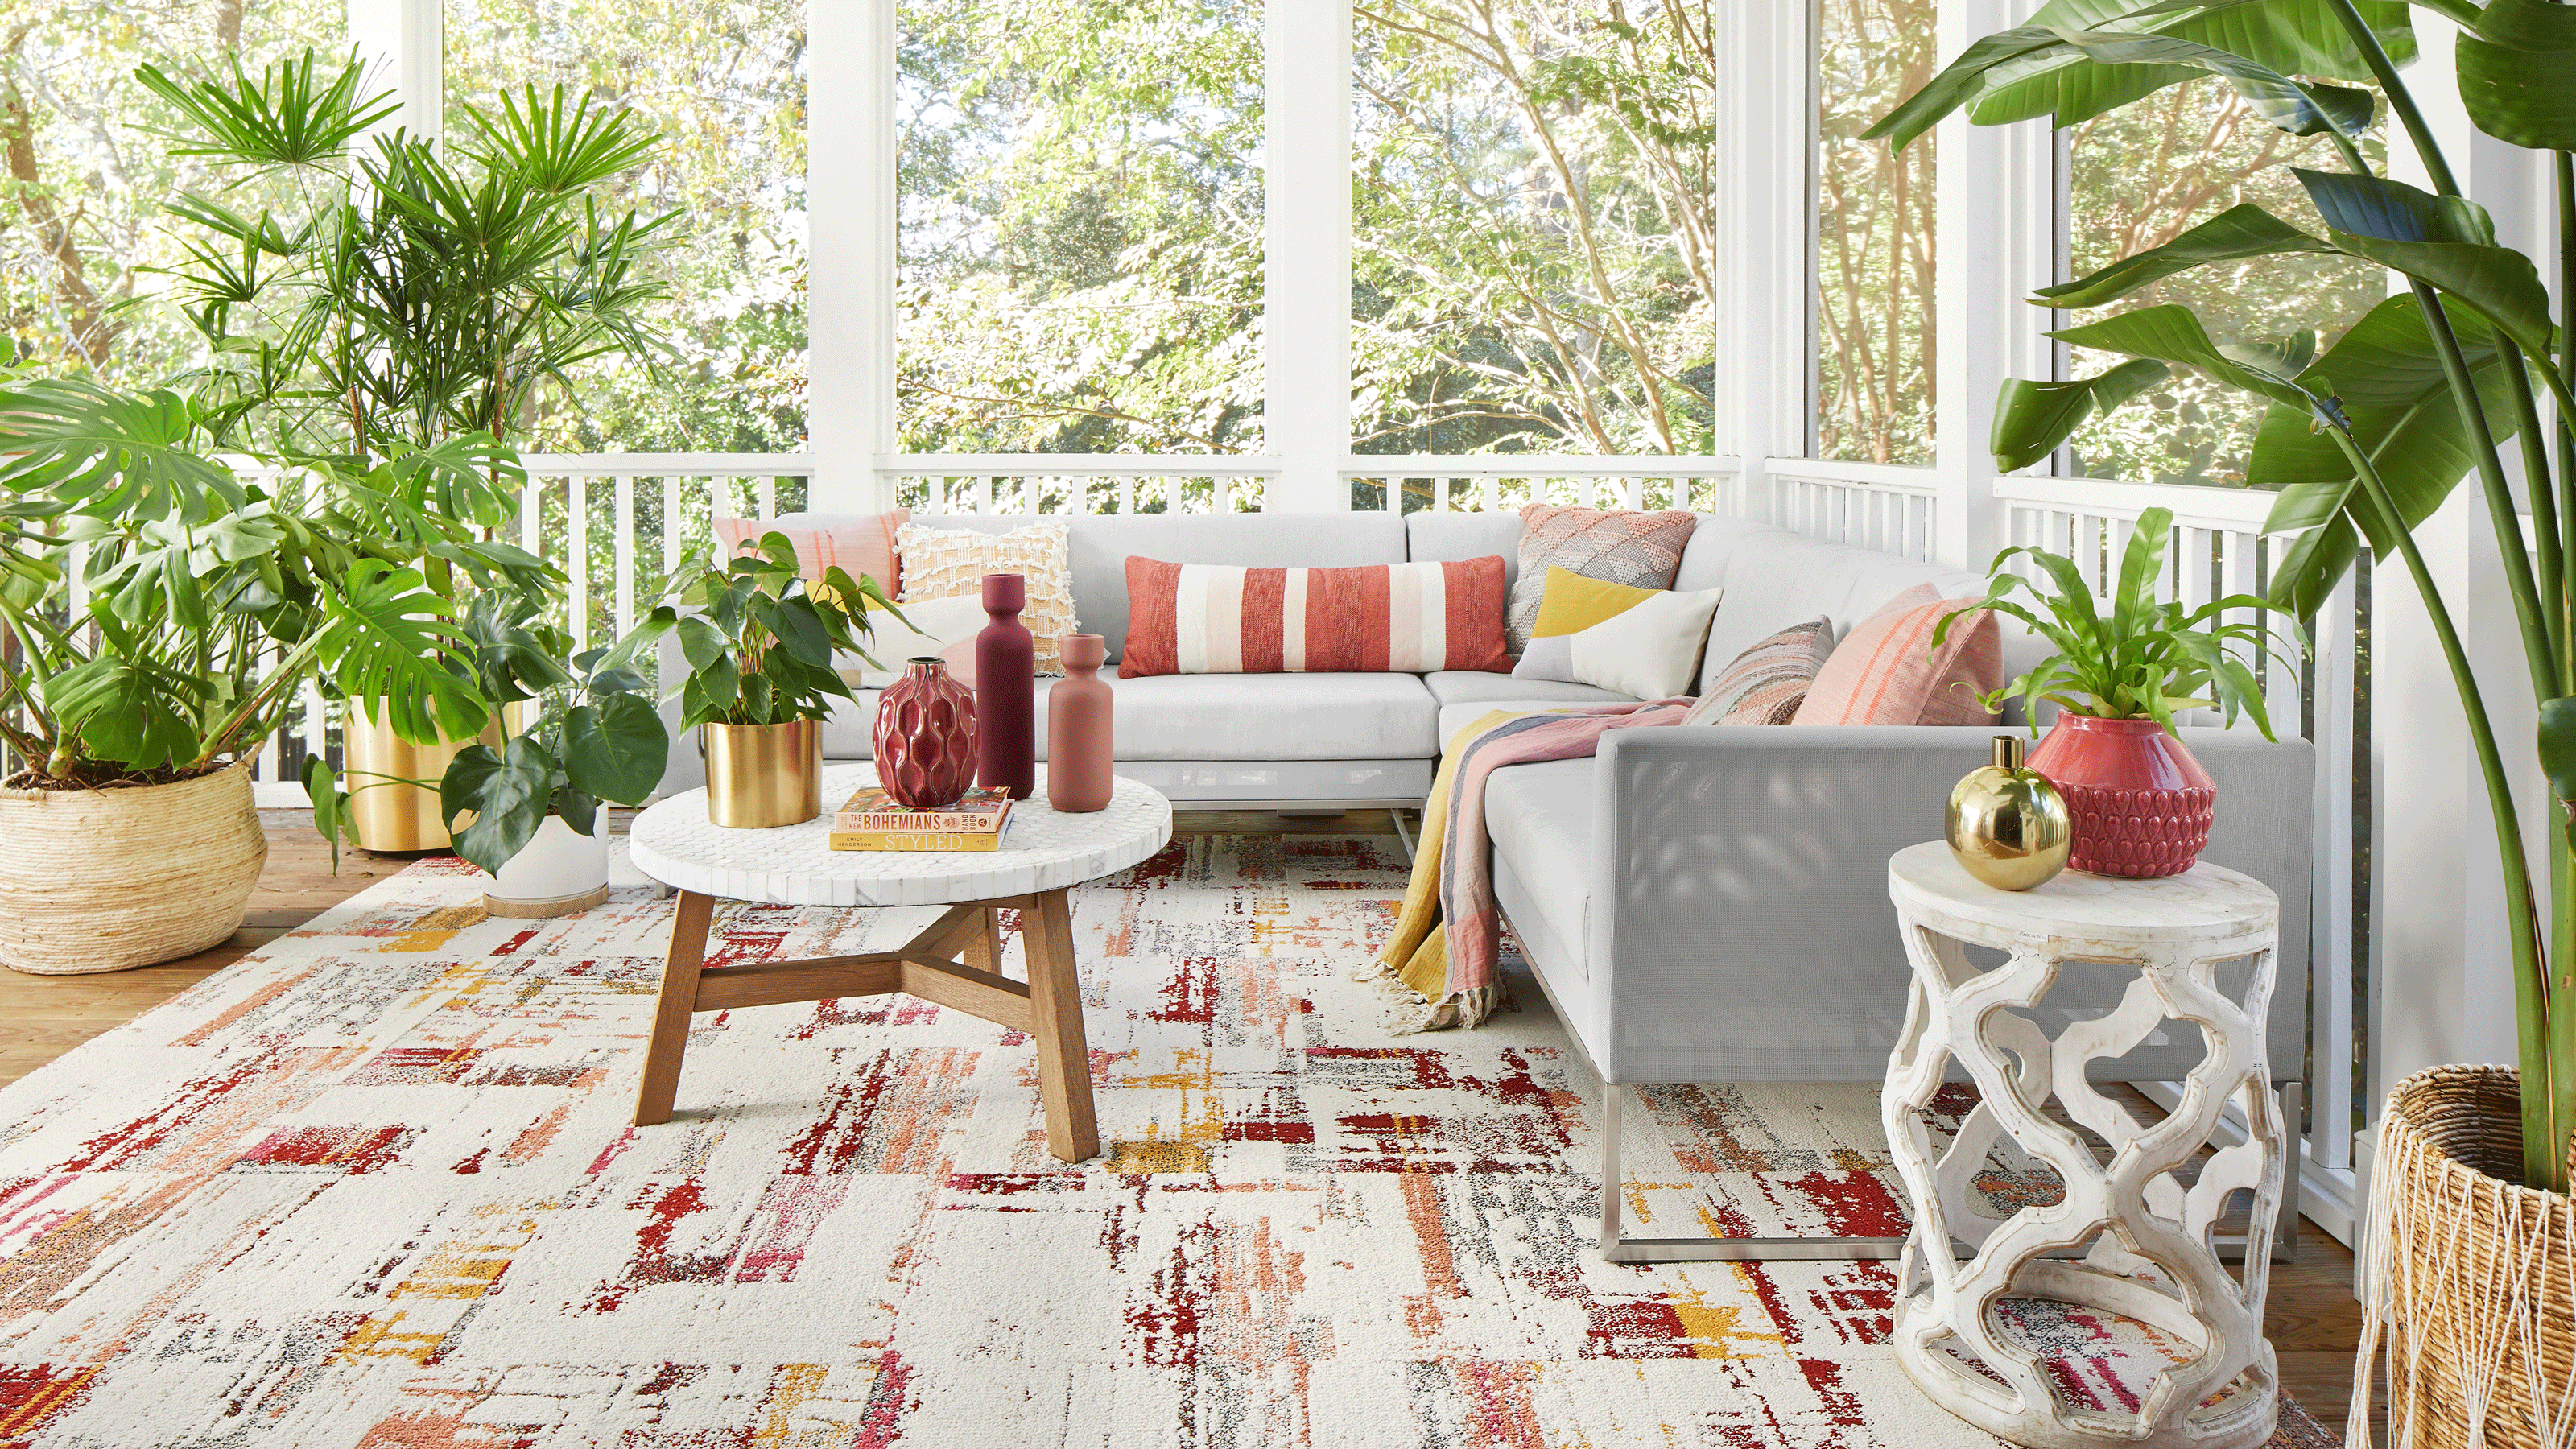 Bright and cheerful seasonal porch with colorful textiles and sociable seating arrangement.